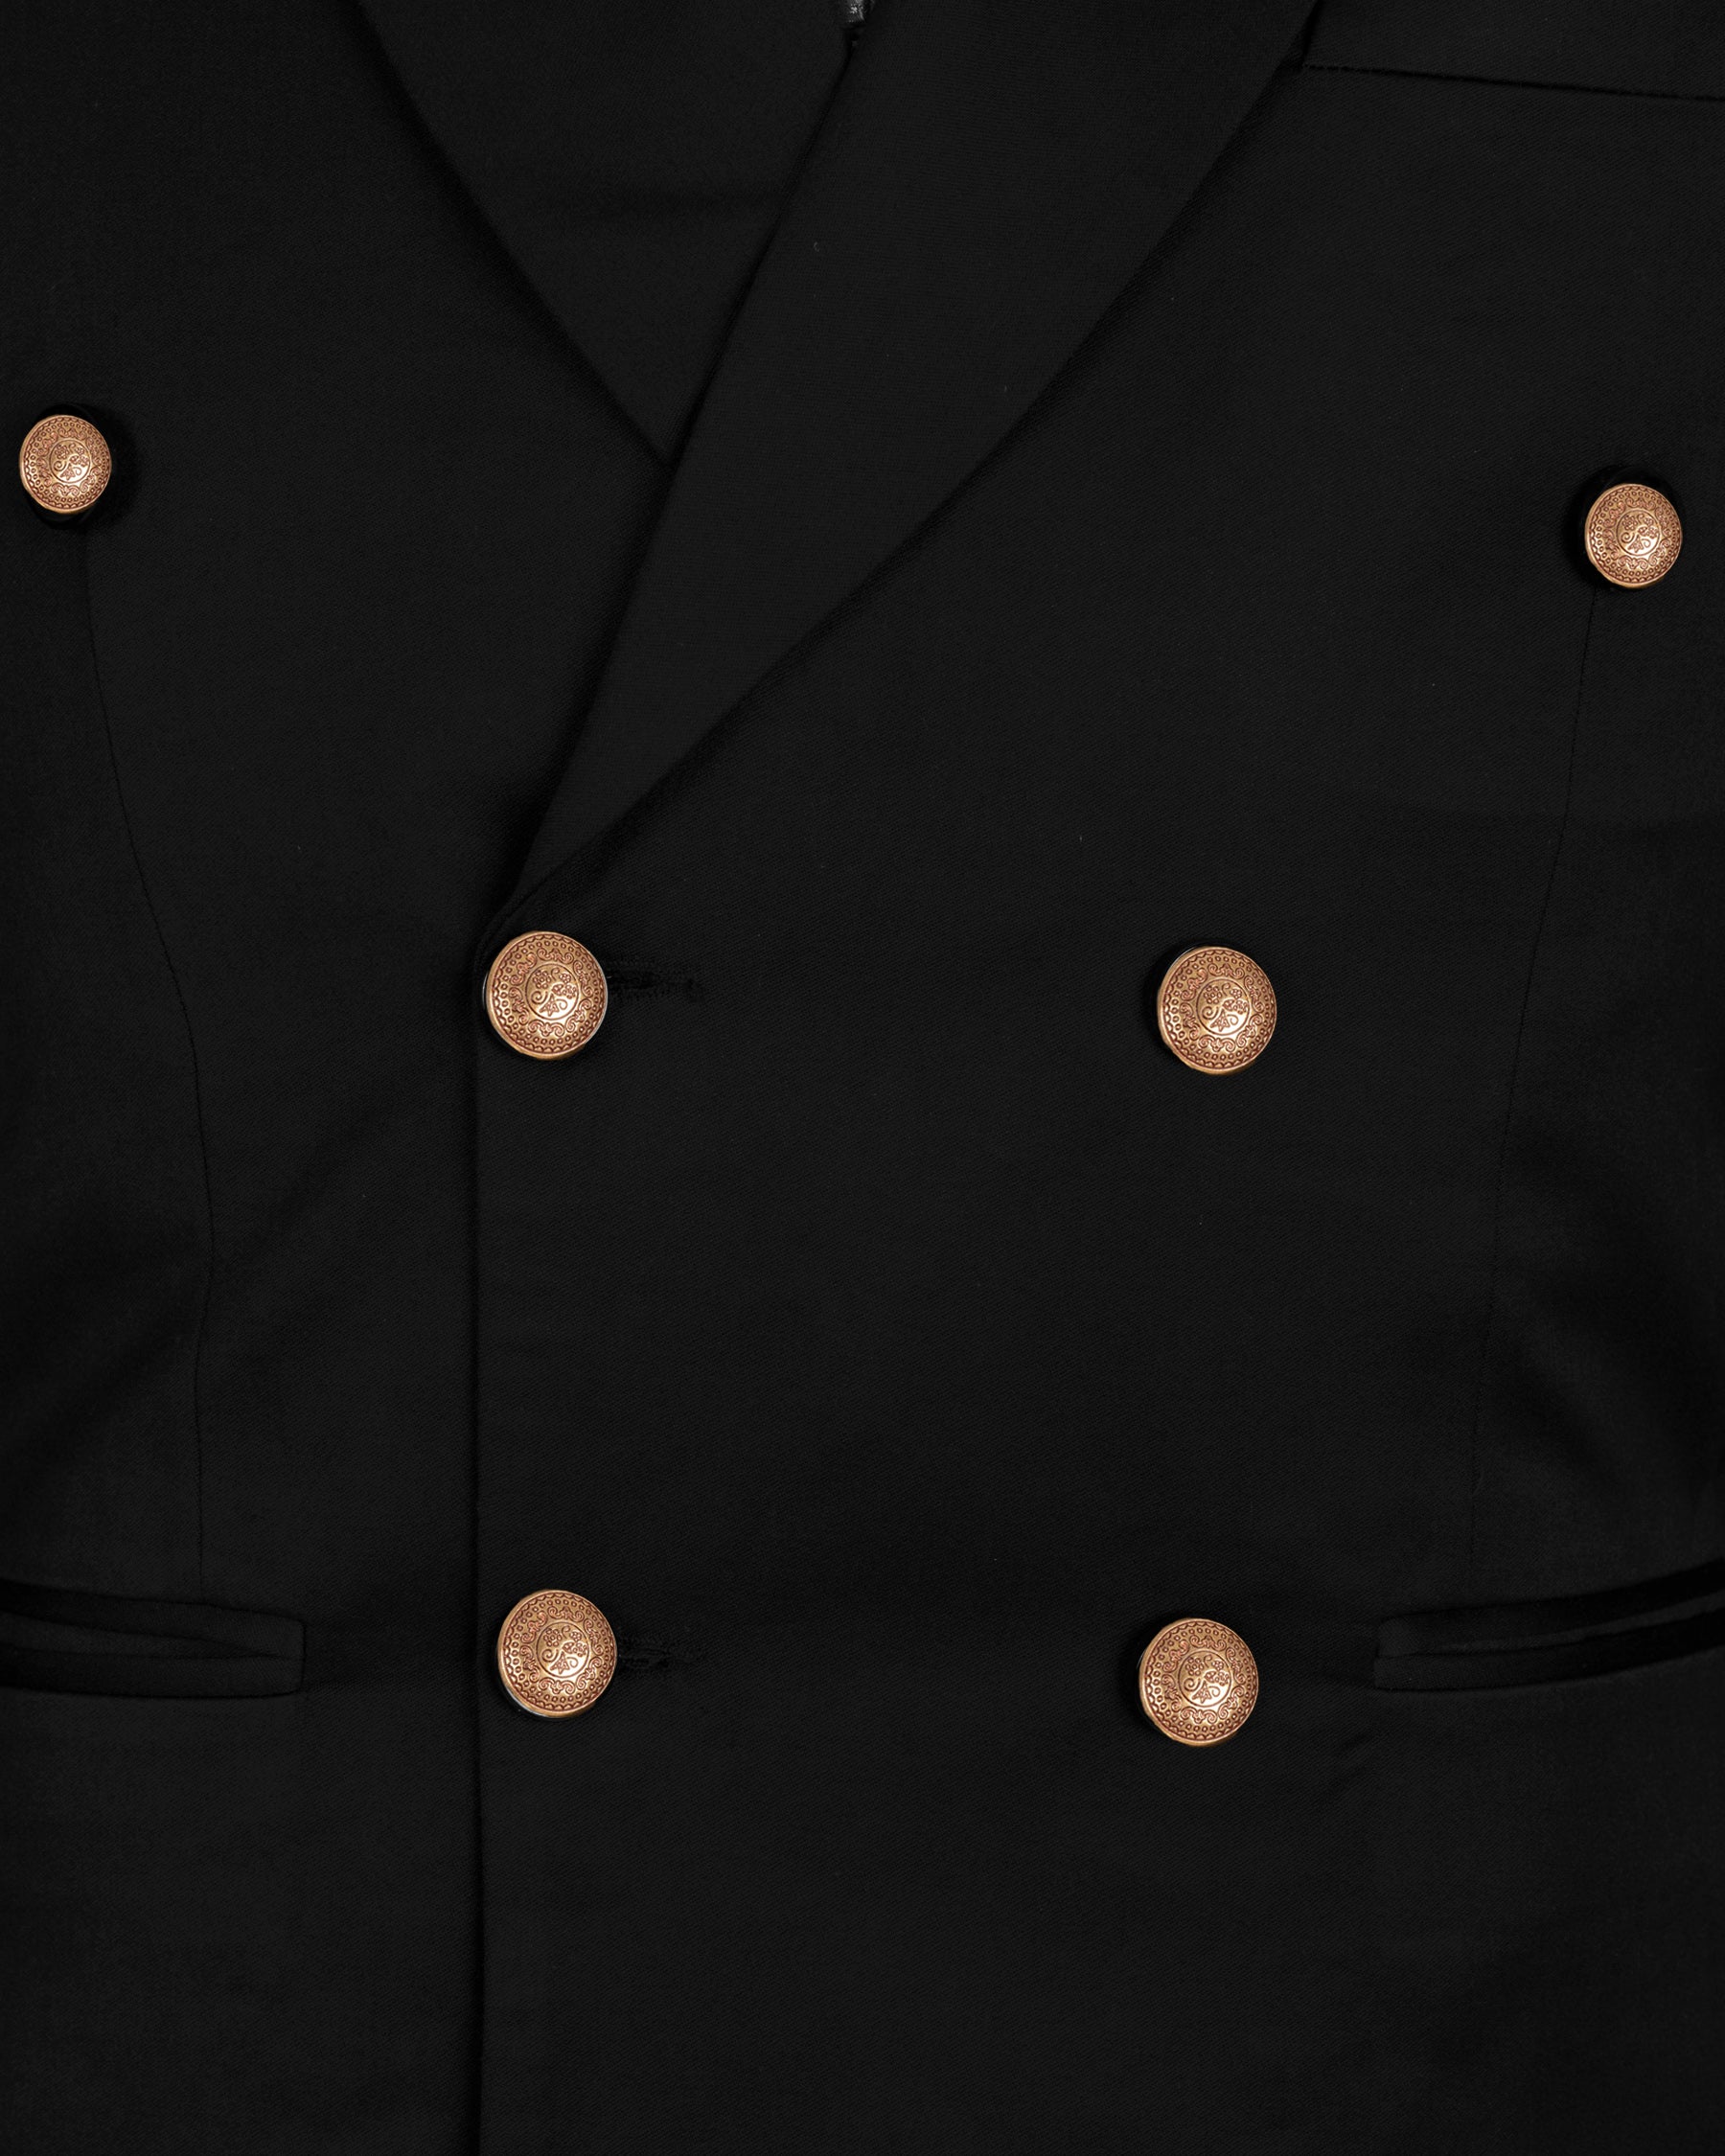 Jade STack Golden Buttons DouSTe-Breasted Wool Rich Suit ST1484-DB-GB-36, ST1484-DB-GB-38, ST1484-DB-GB-40, ST1484-DB-GB-42, ST1484-DB-GB-44, ST1484-DB-GB-46, ST1484-DB-GB-48, ST1484-DB-GB-50, ST1484-DB-GB-52, ST1484-DB-GB-54, ST1484-DB-GB-56, ST1484-DB-GB-58, ST1484-DB-GB-60